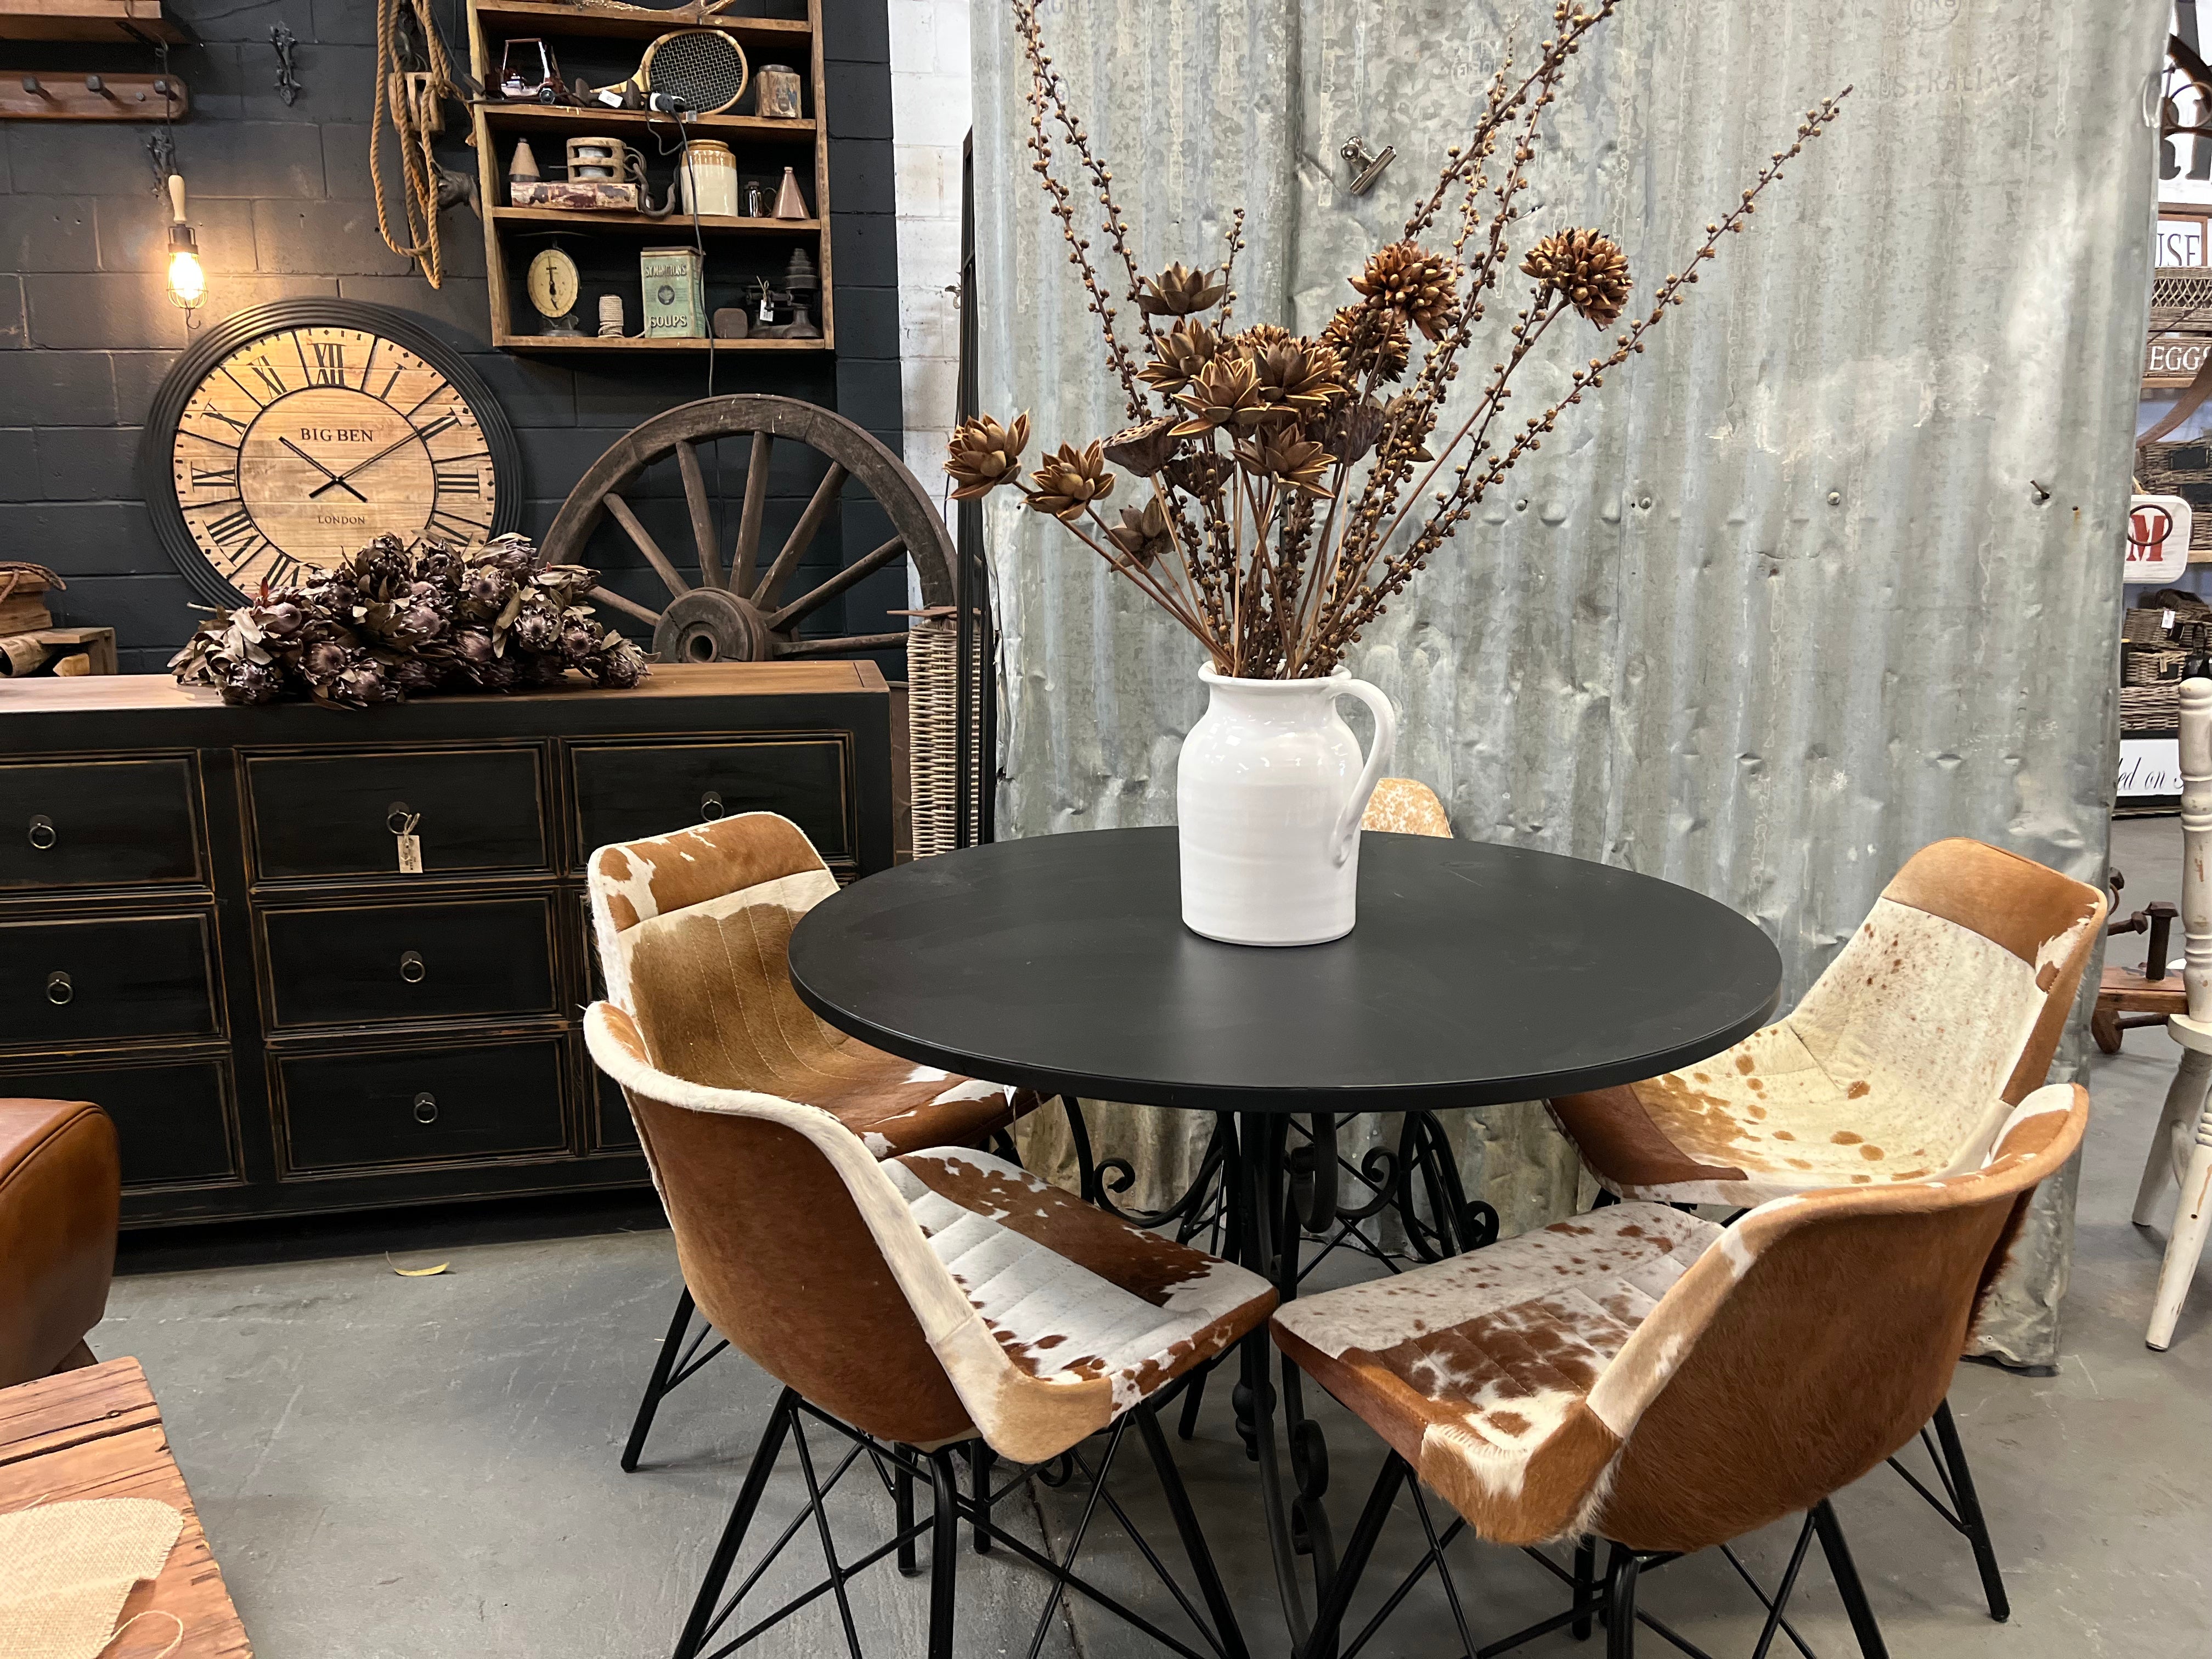 SET of 5 Premium COWHIDE Dining Chairs